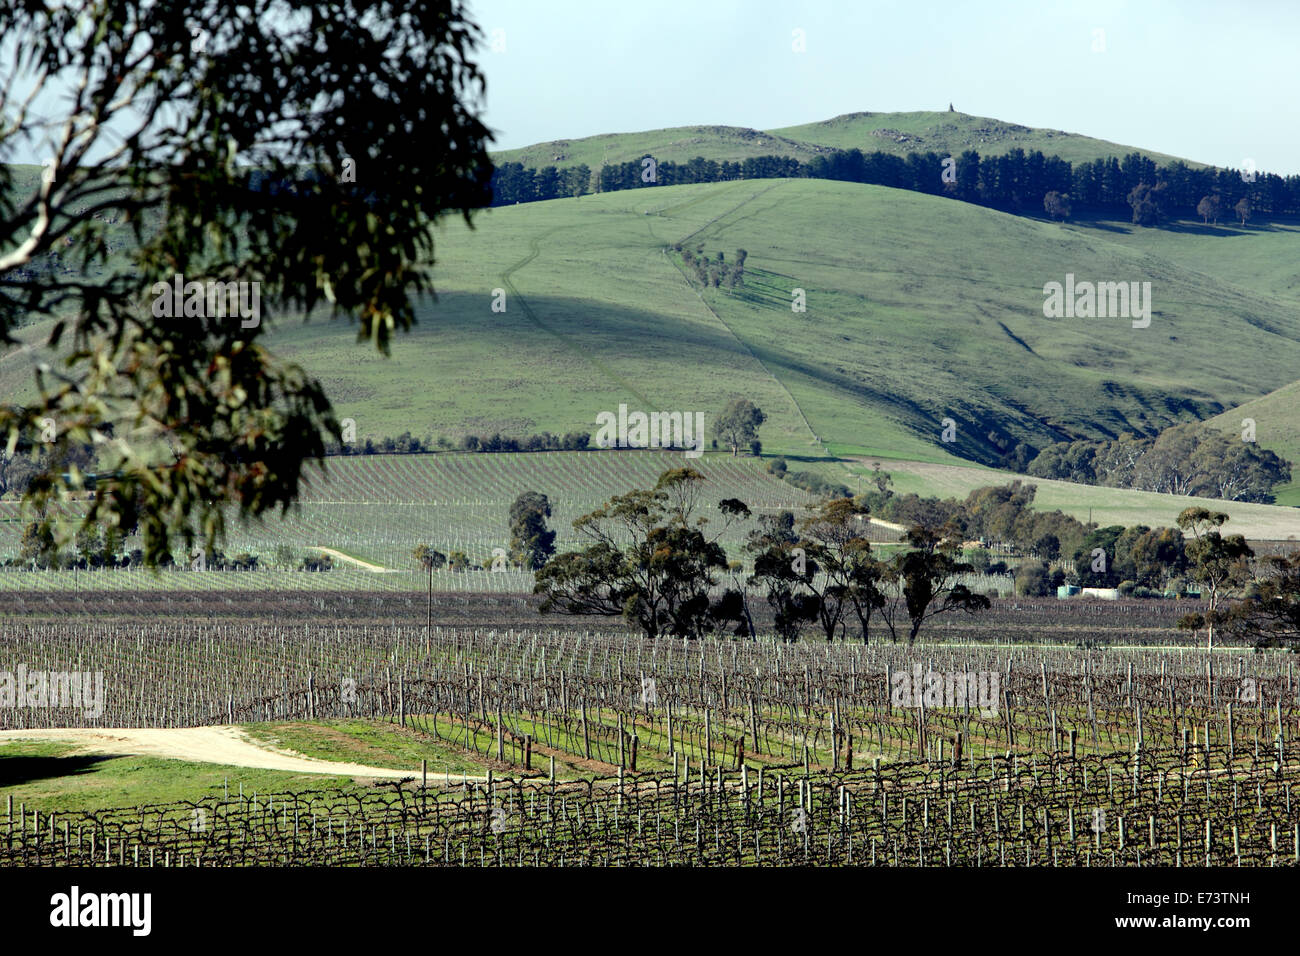 Rows of vineyards beneath rolling hills in the Barossa Valley in Australia Stock Photo